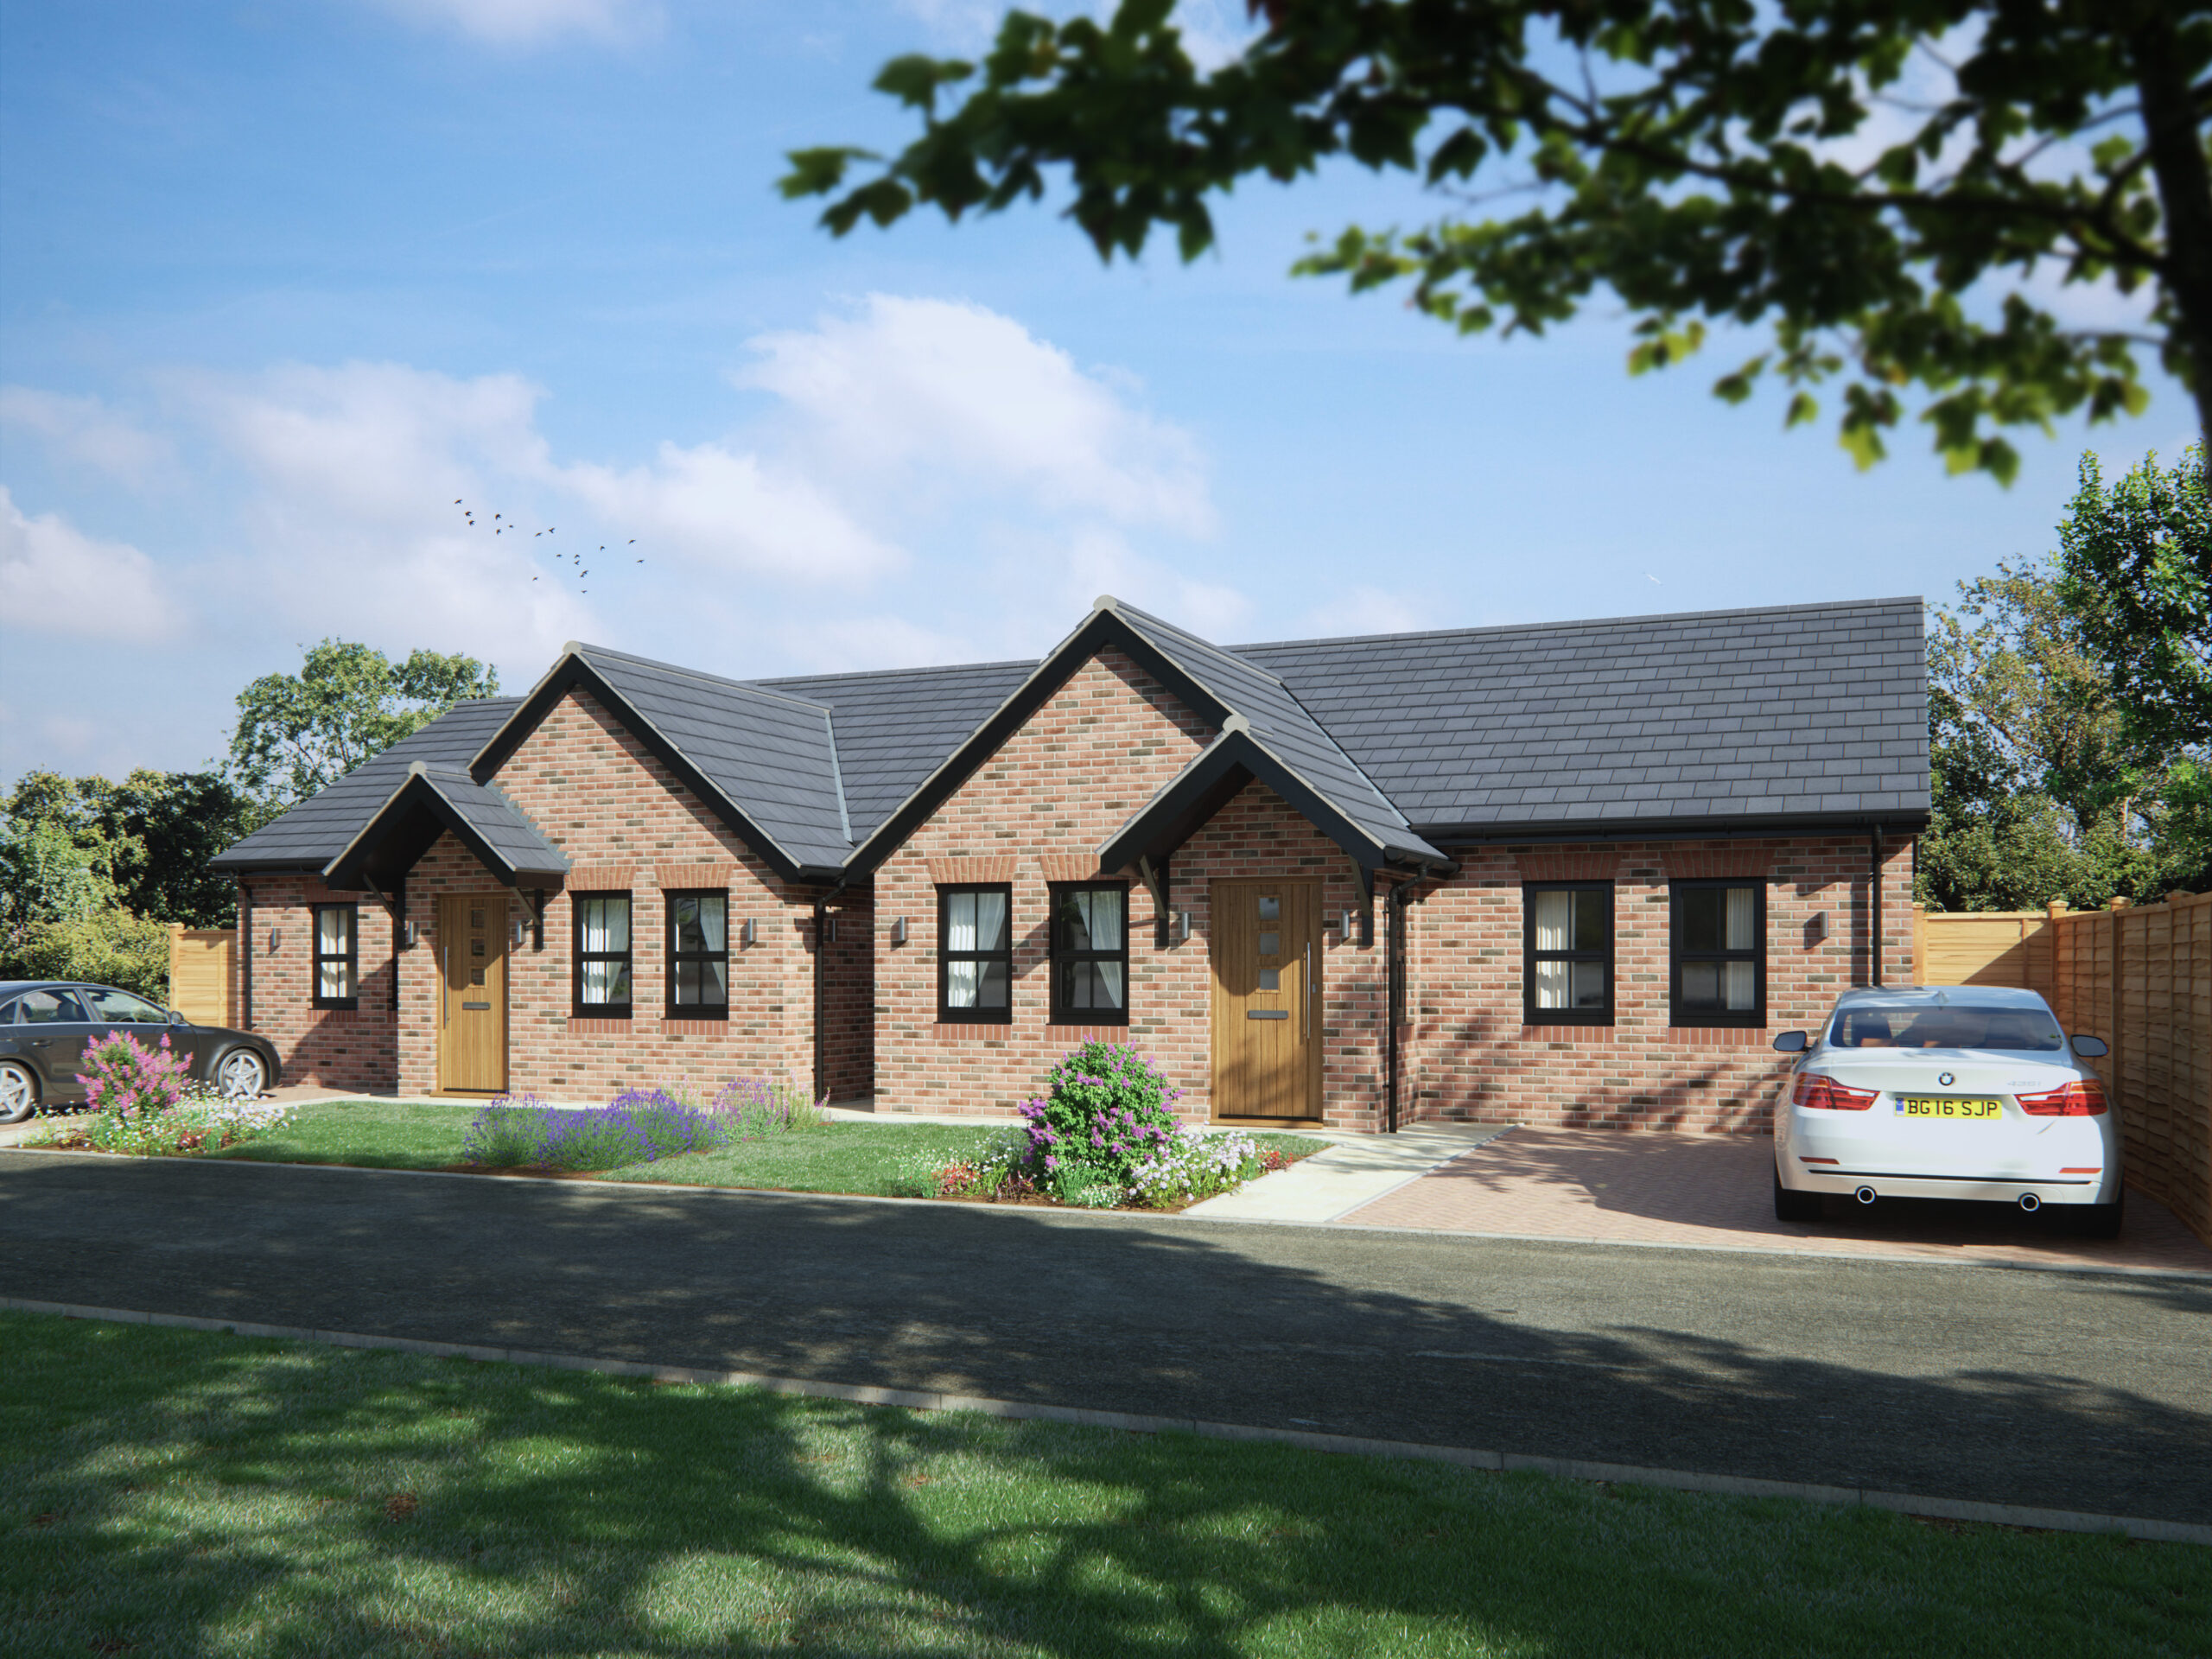 Exclusive development of just 2 detached bungalows released for sale in Market Drayton